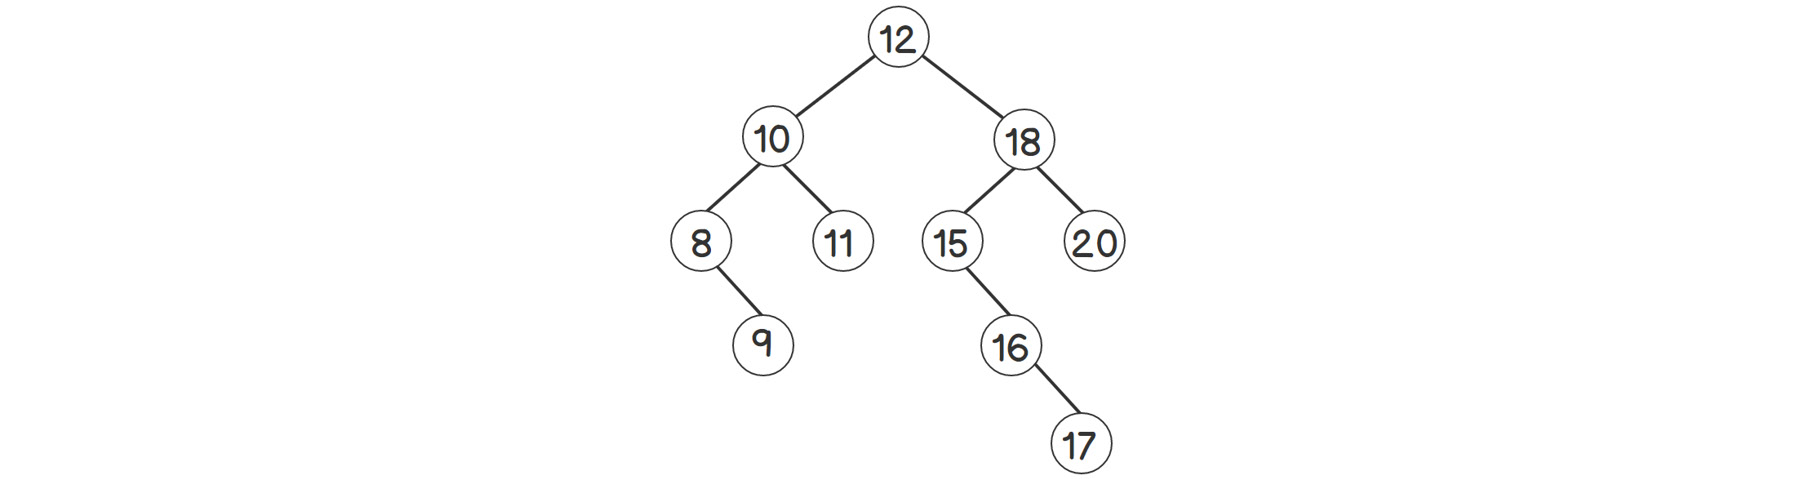 Figure 2.7: Binary search tree rooted at 12